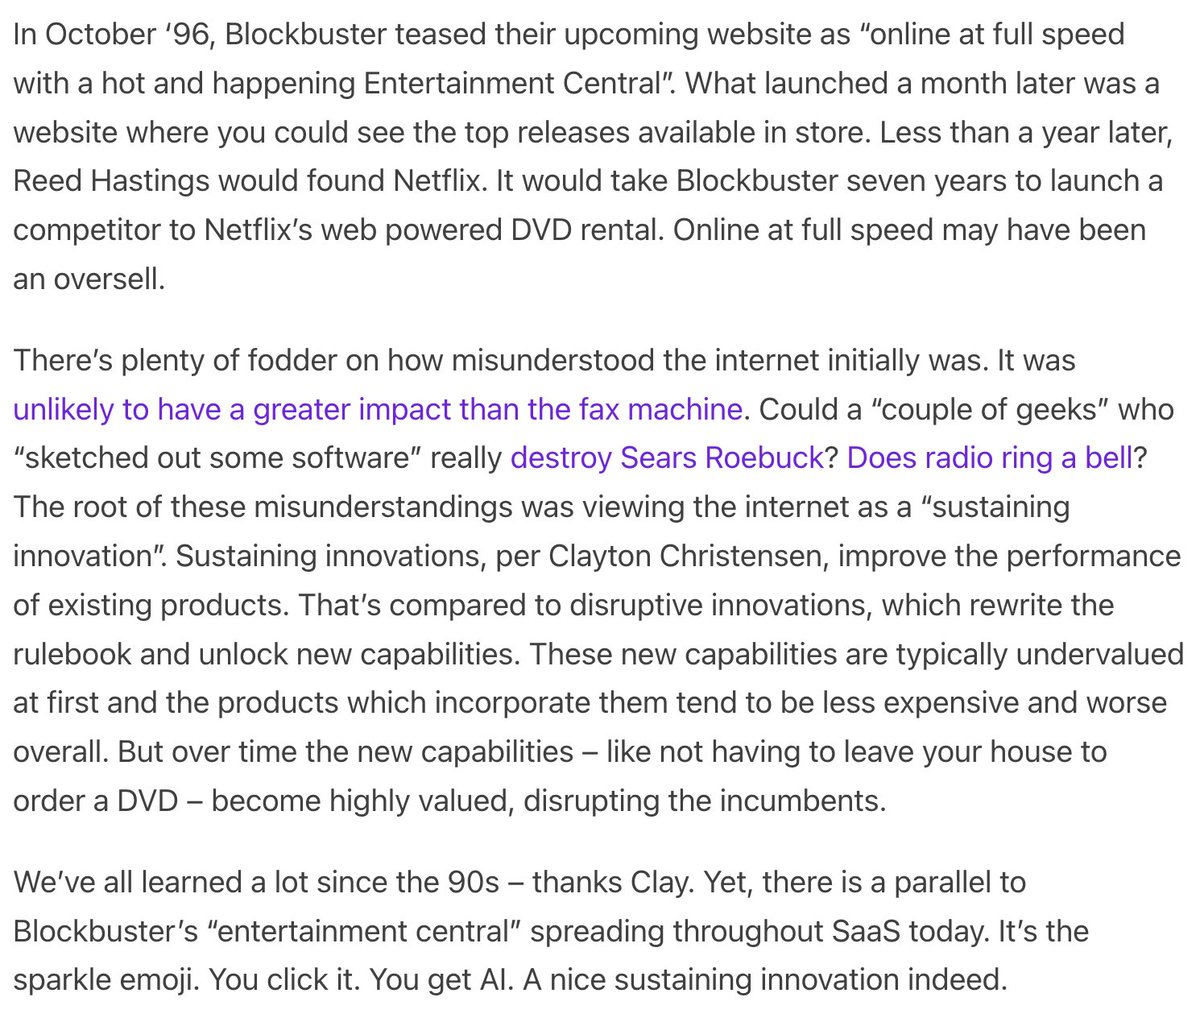 I wrote about Blockbuster's first website, what it can teach us about AI, and why we need to move on from the sparkle emoji. Link in next tweet!